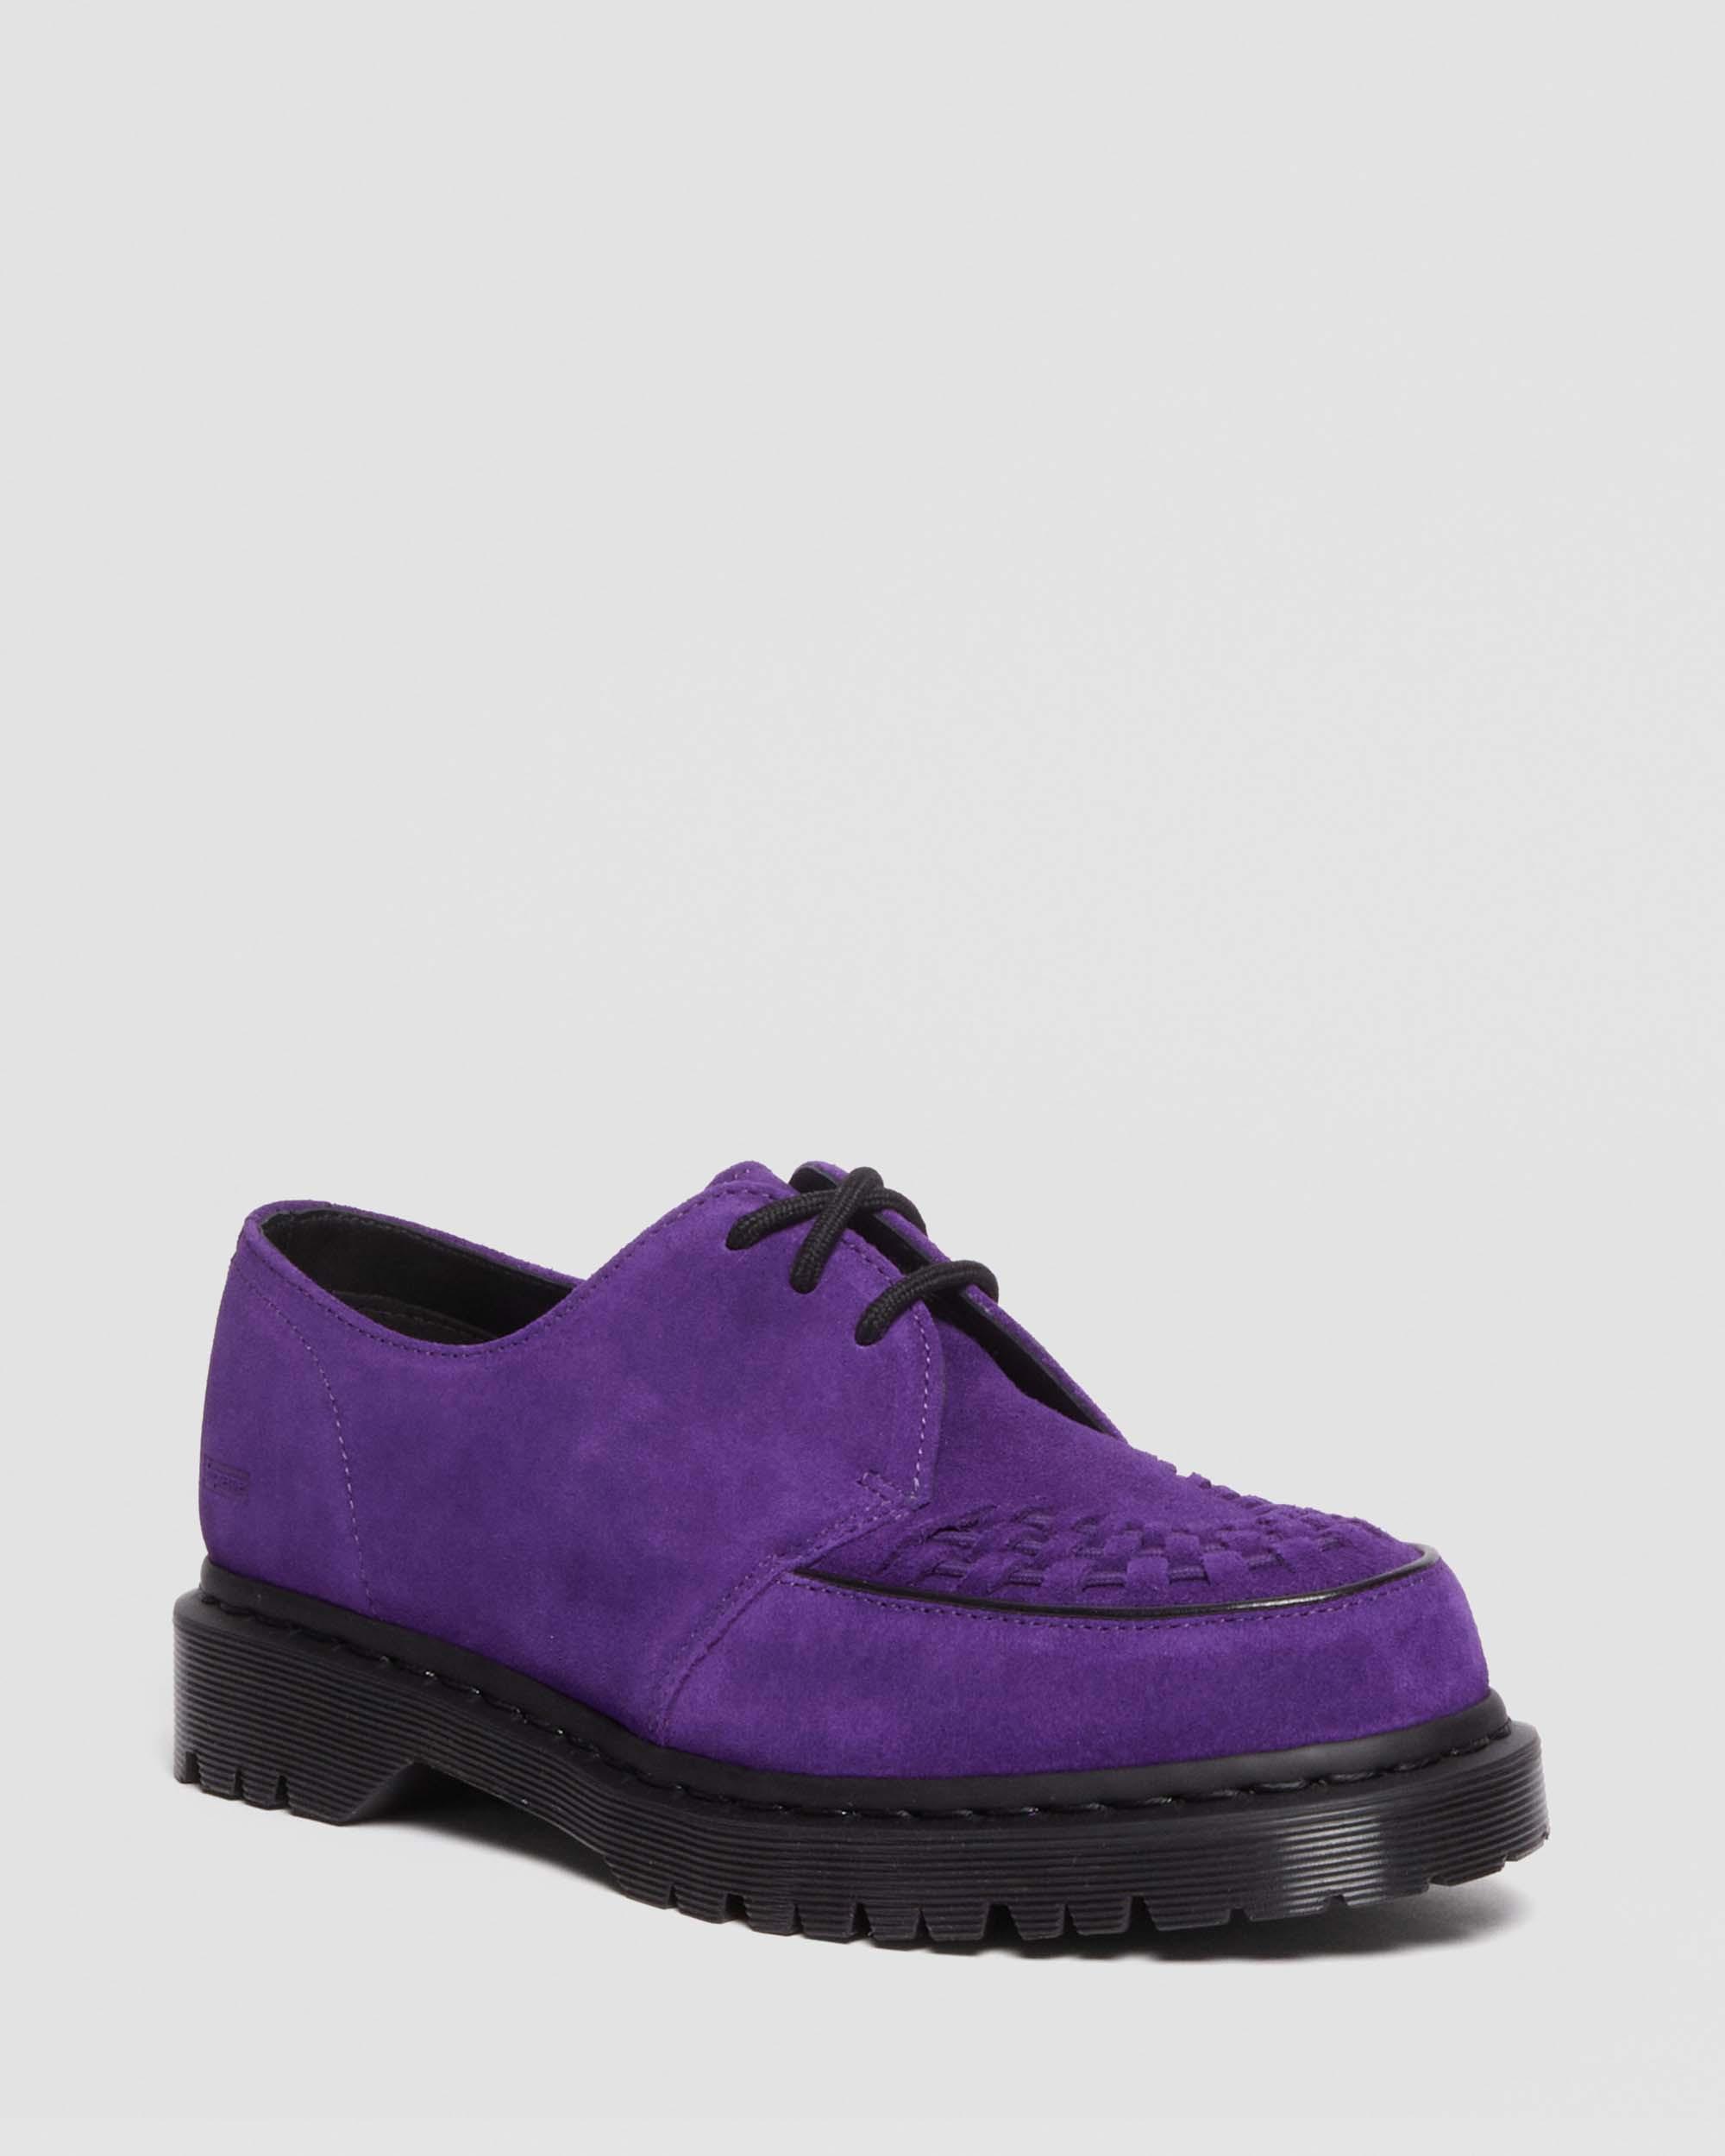 Ramsey Supreme Suede Creeper Shoes in Purple | Dr. Martens